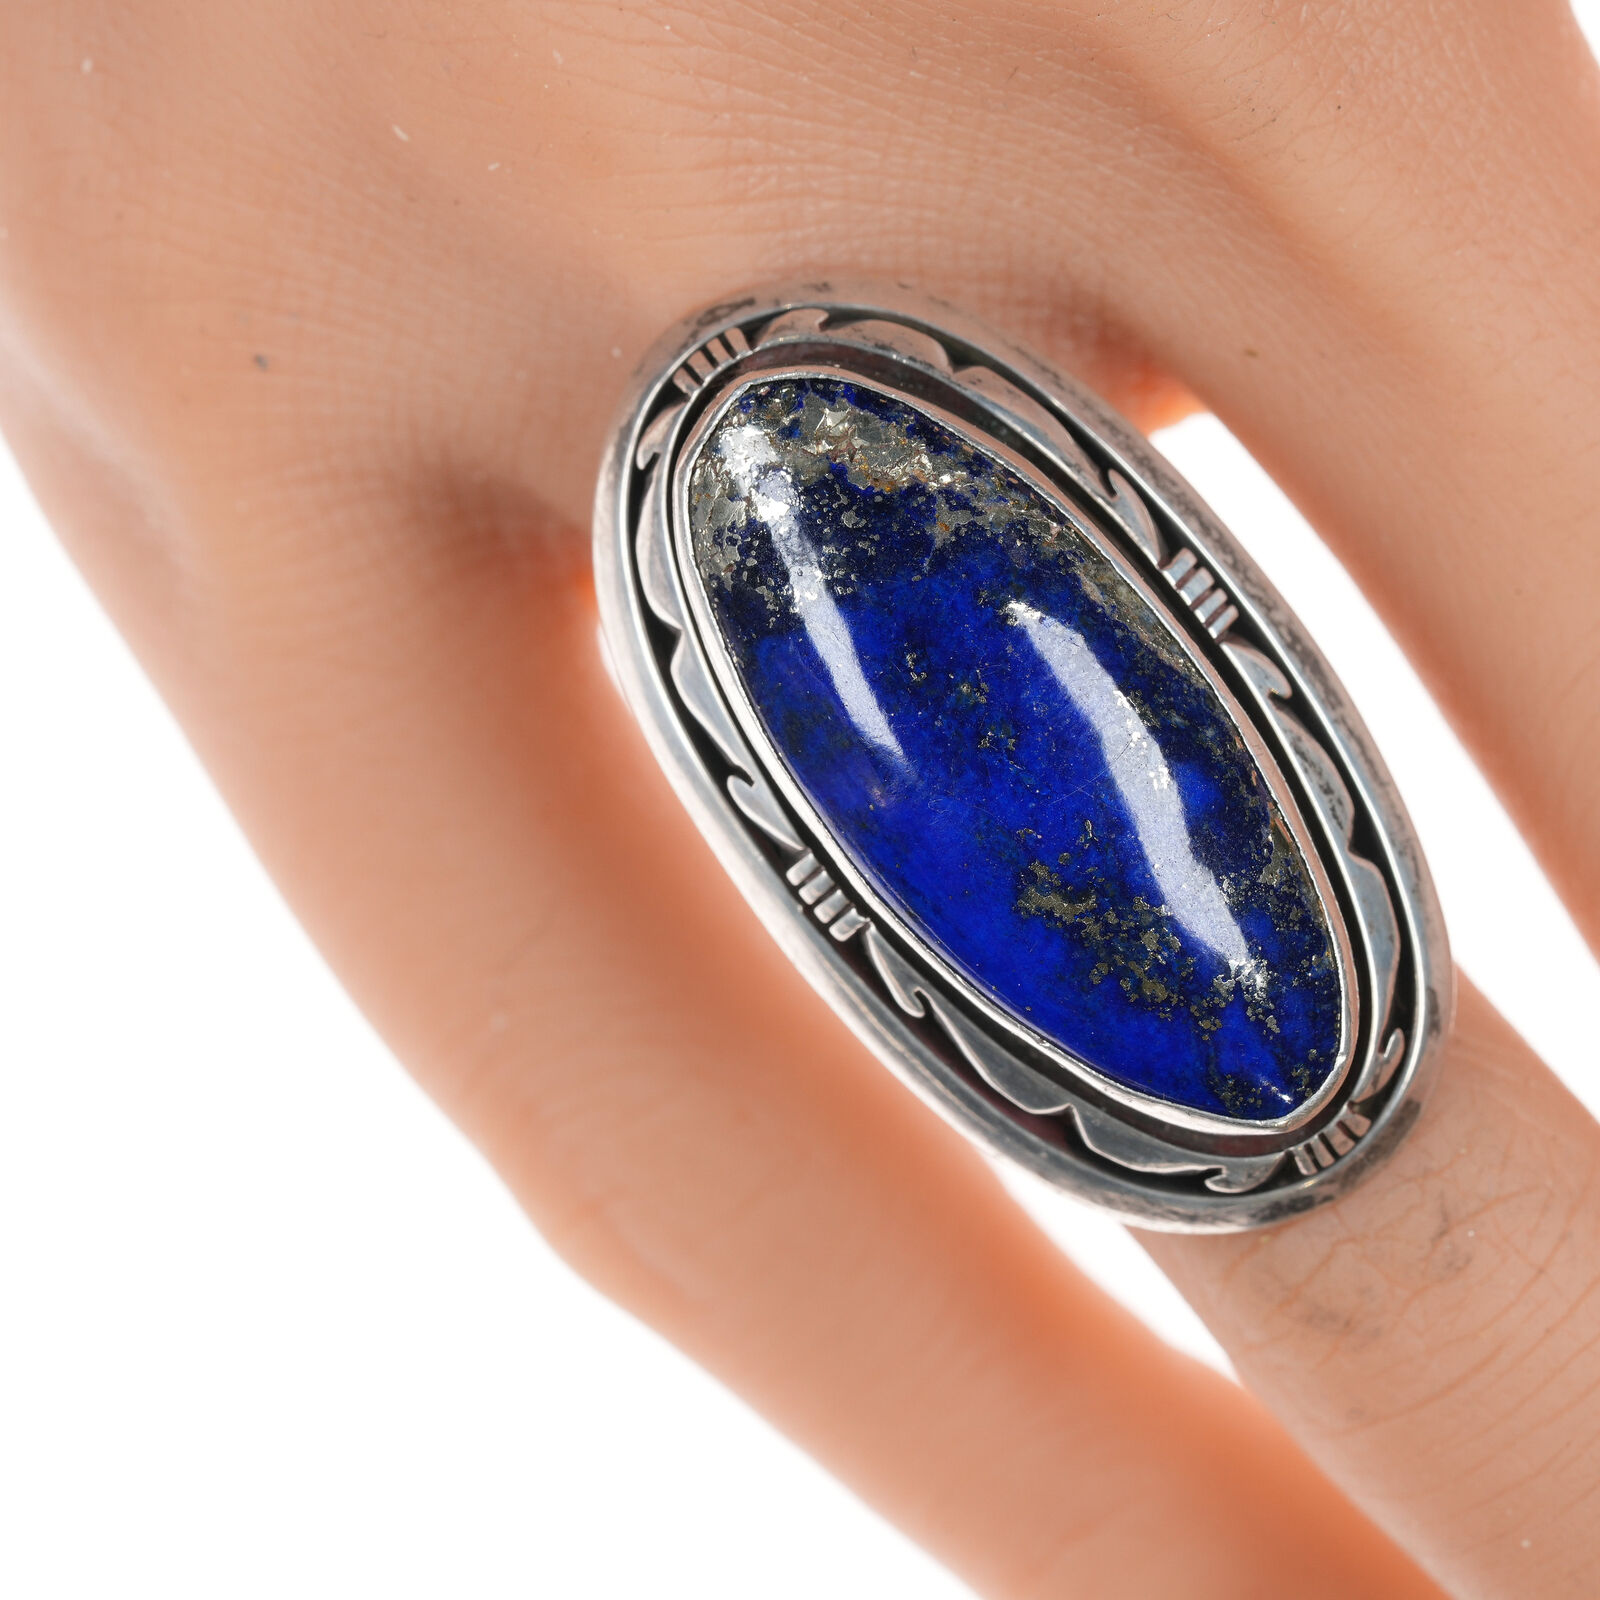 Sz 8 Les Baker (1935-2014) Silver and high pyrite lapis ring